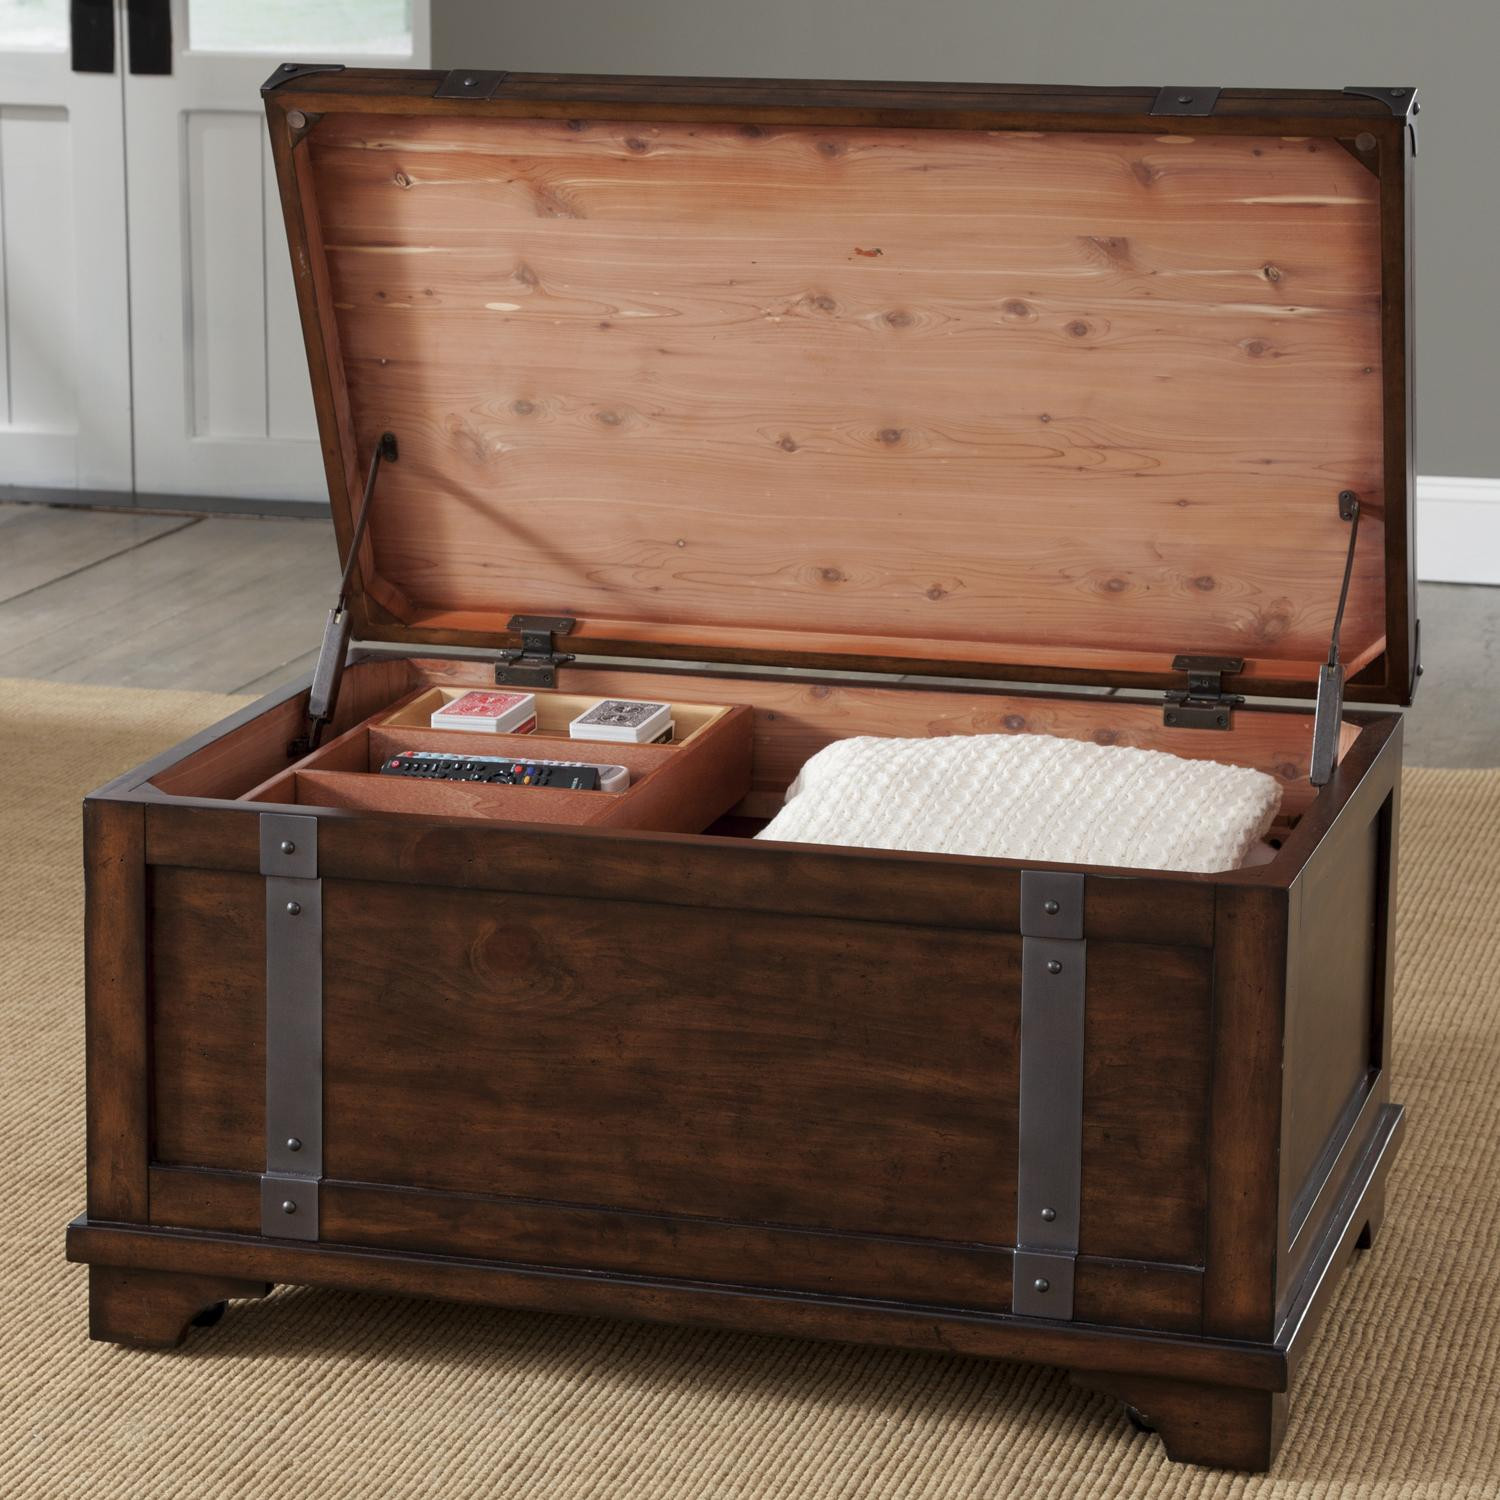 Bedroom Storage Trunk
 Aspen Skies Industrial Casual Storage Trunk with Removable